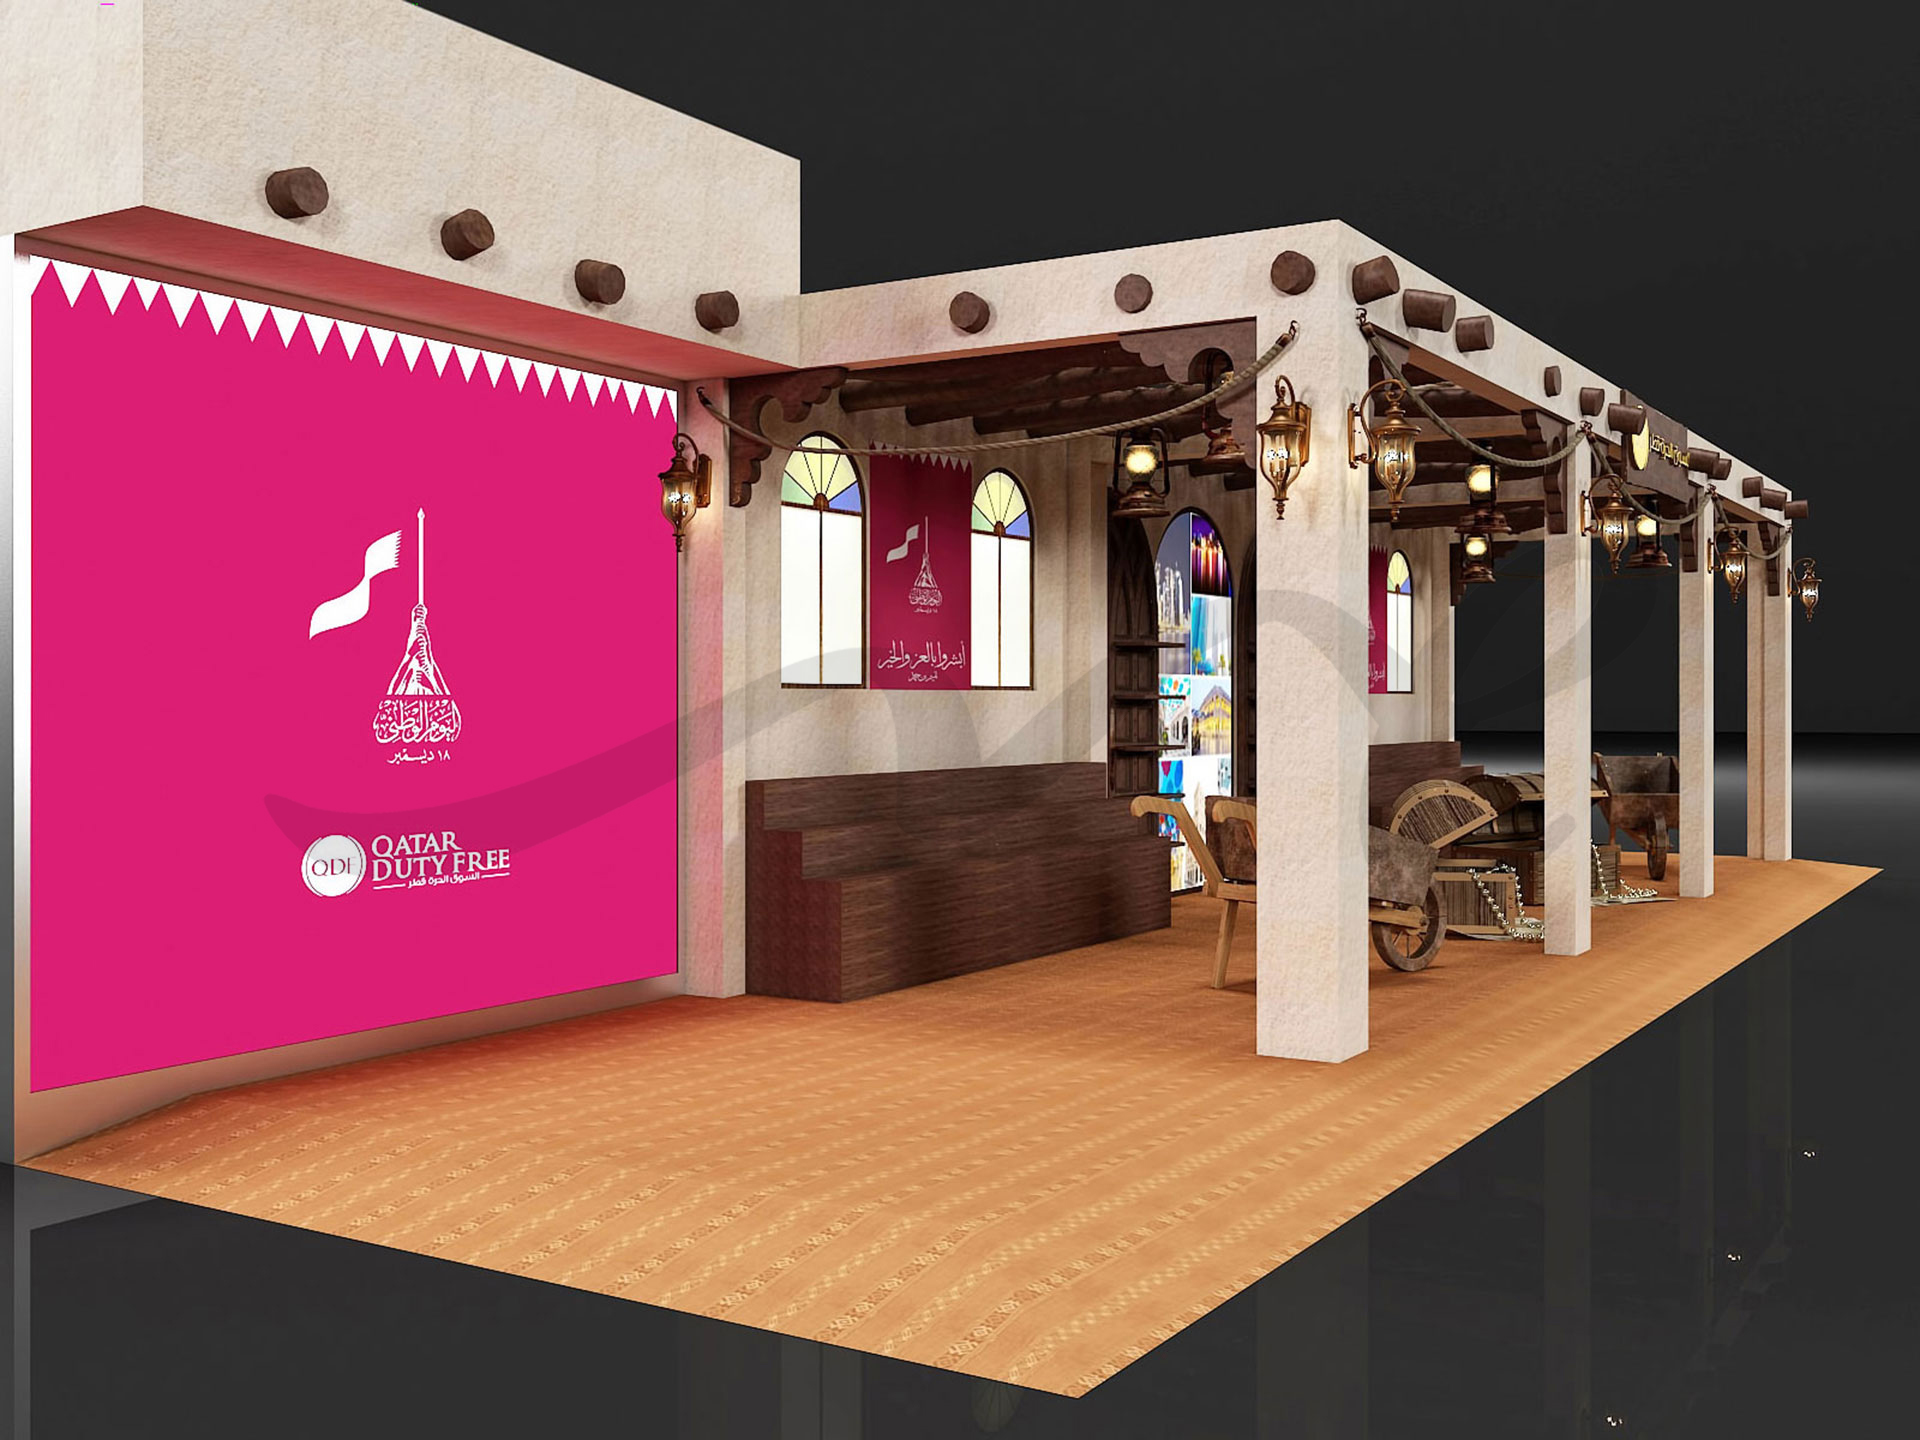 3D Concept and Design of Qatar National Day 2018 Souq Stand for Qatar Duty Free produced by ME Visual